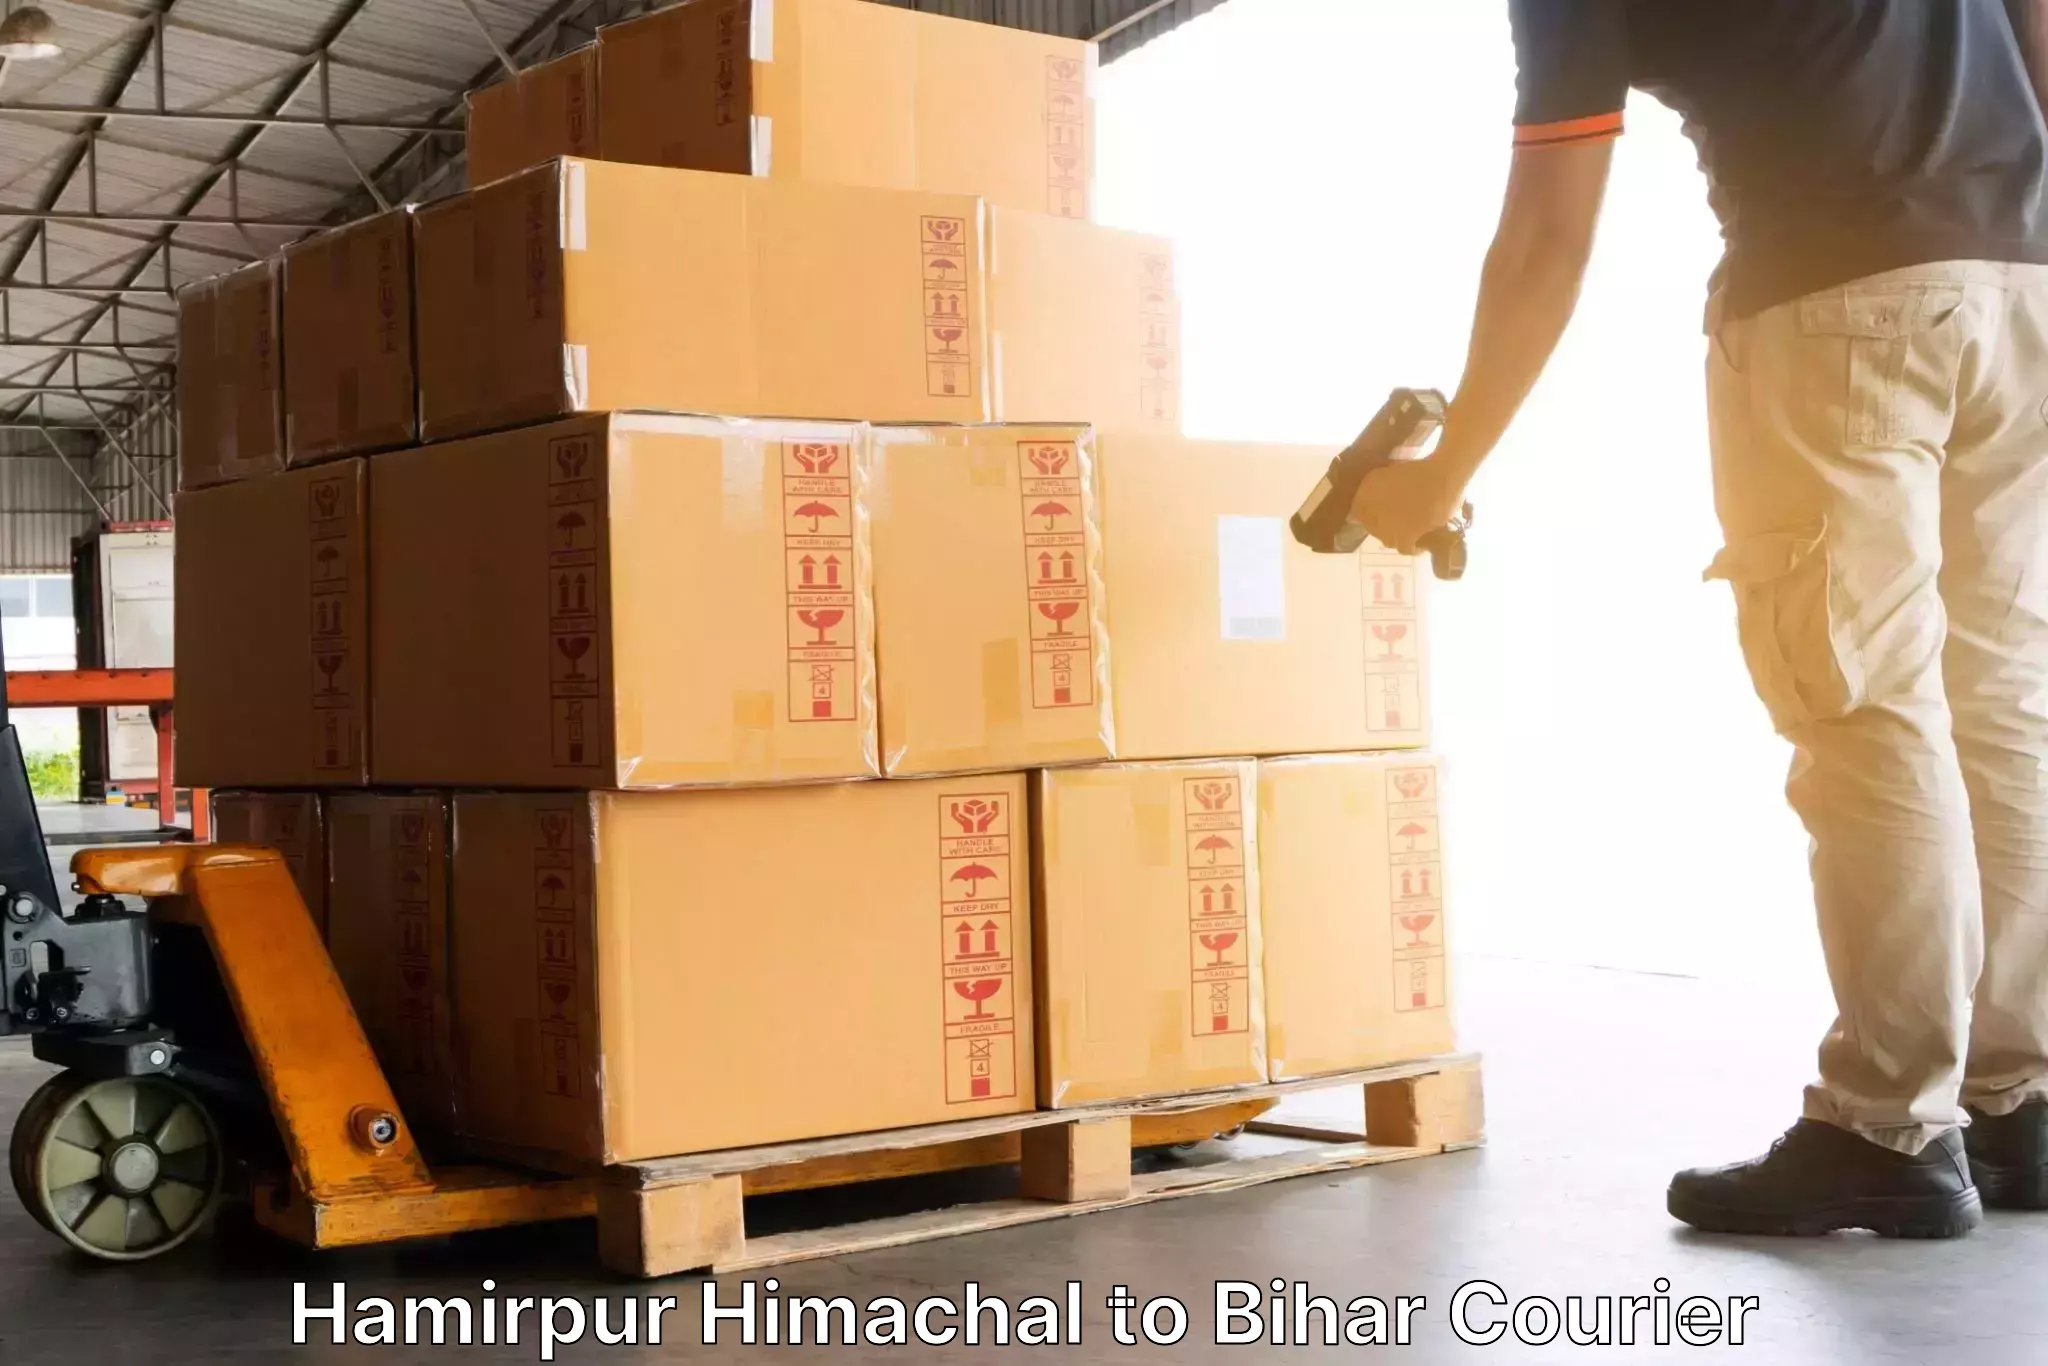 24-hour courier services in Hamirpur Himachal to Barauni